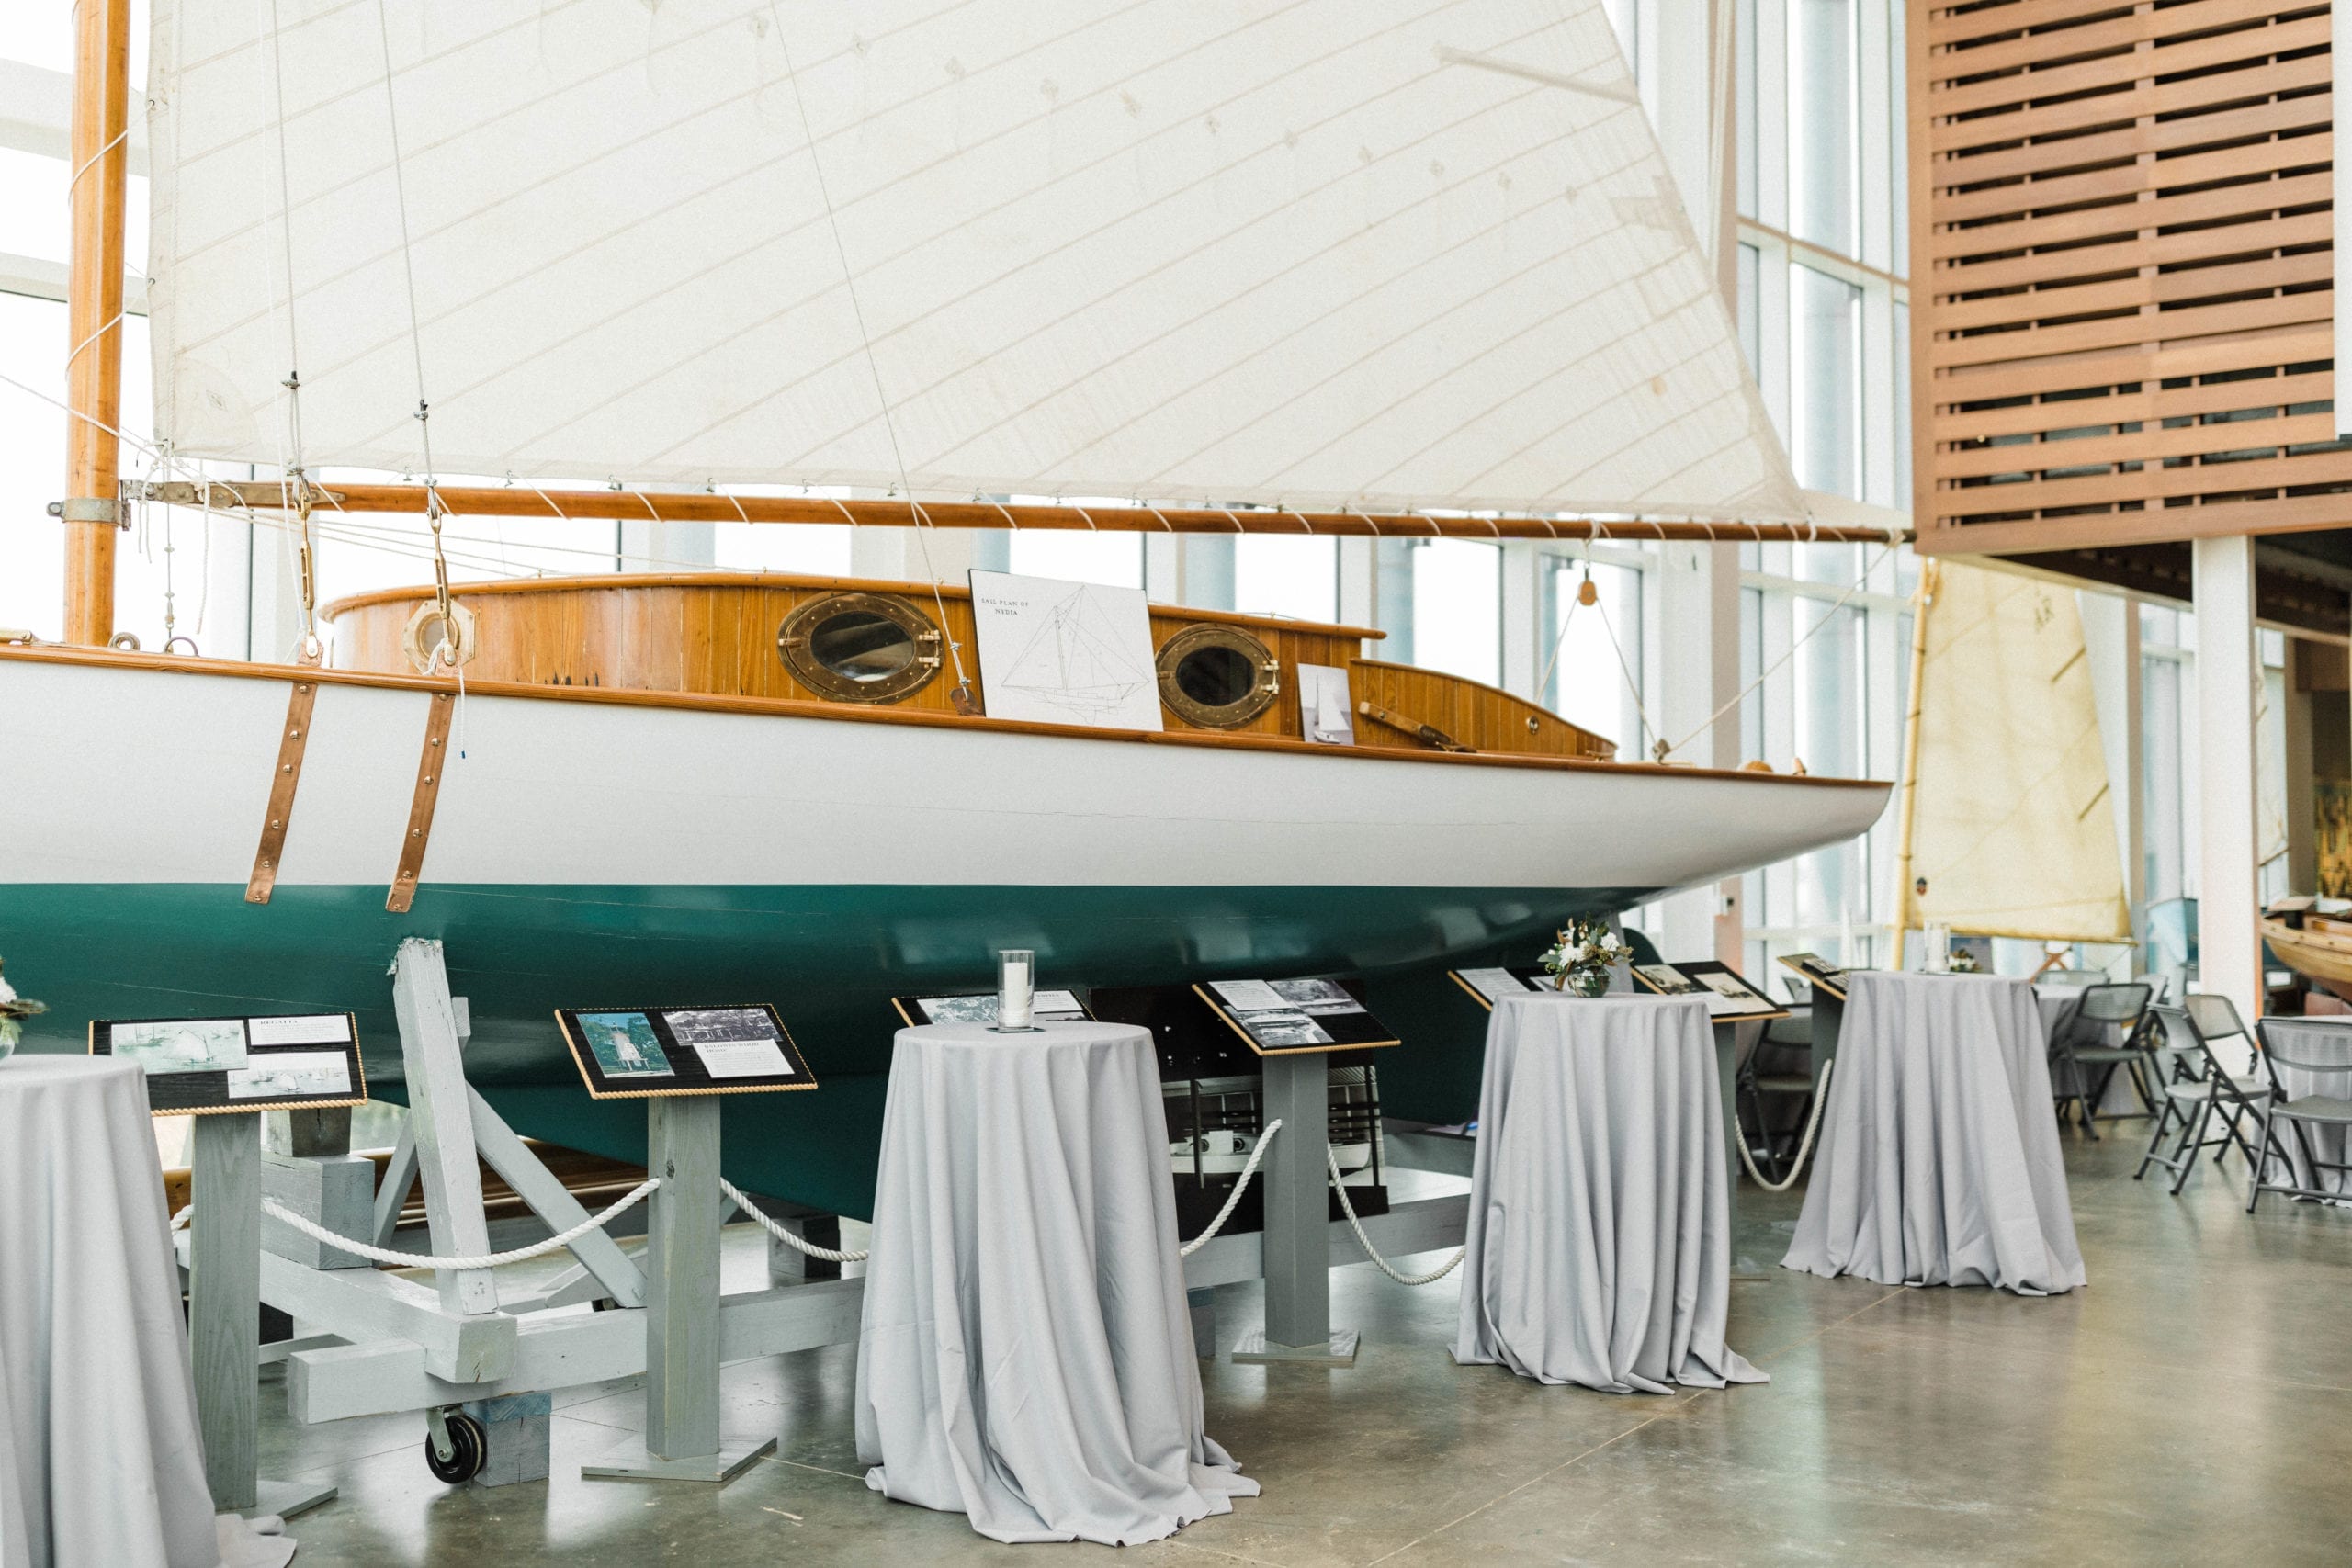 Tables next to sailboat in Maritime and Seafood Industry Museum wedding reception